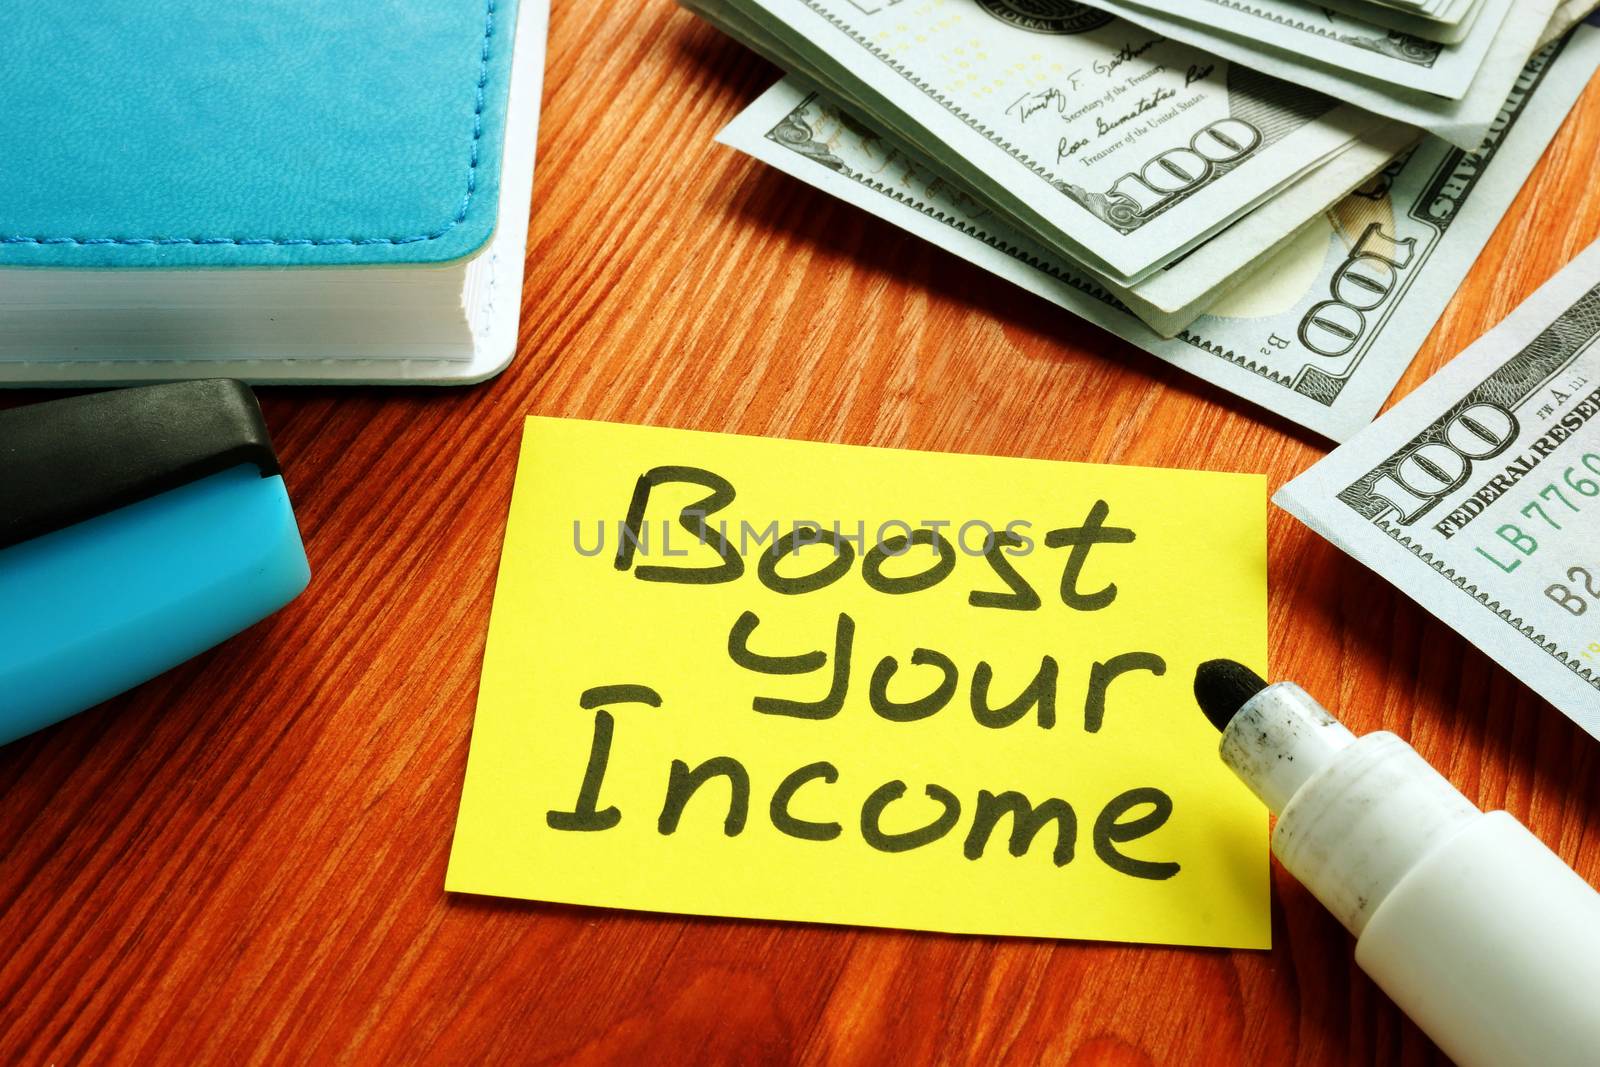 Boost Your Income financial motivation phrase and money.